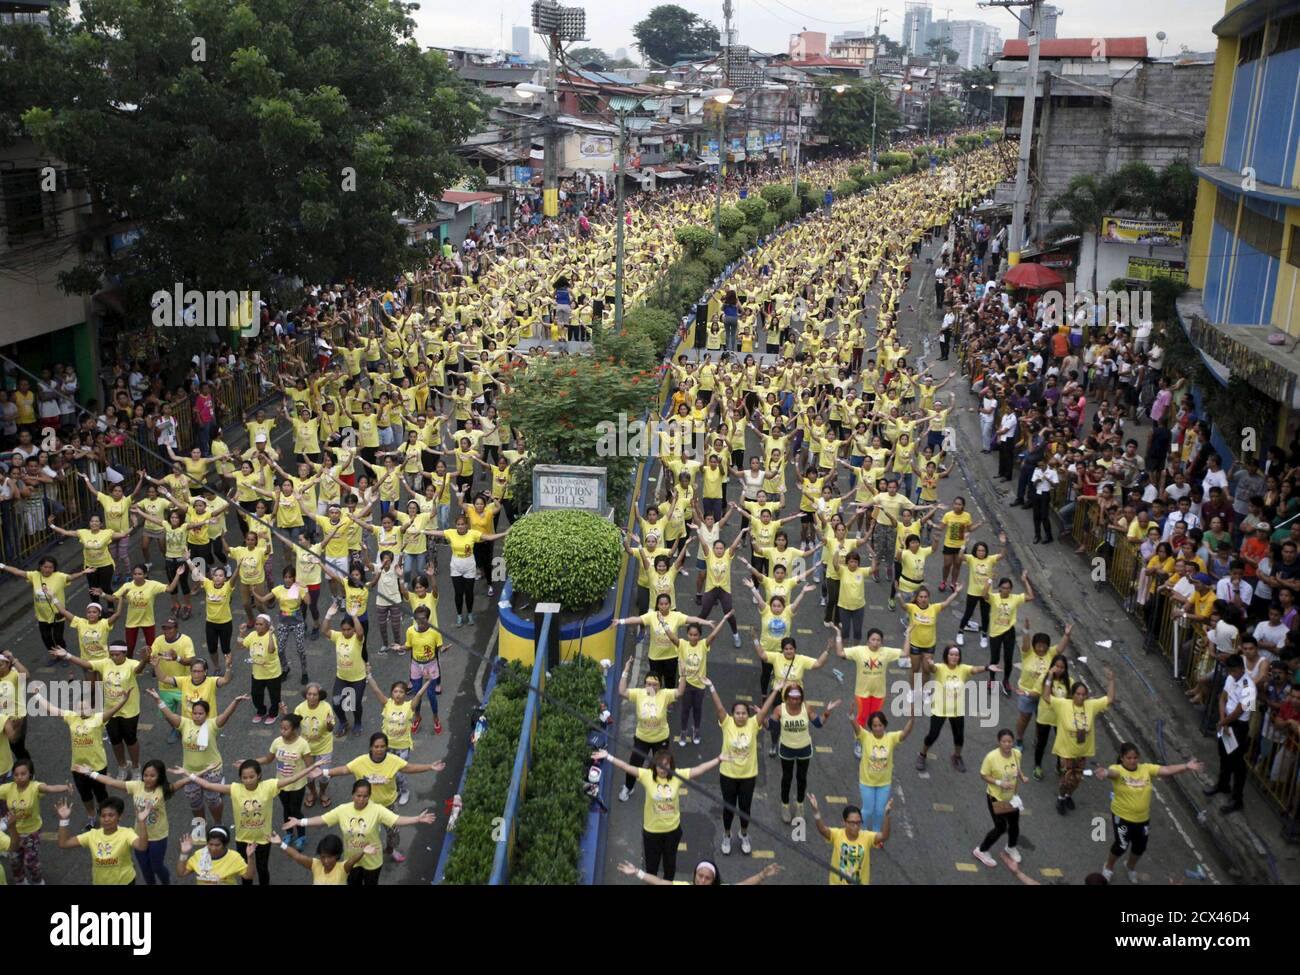 Thousands of health enthusiasts dance to high tempo music as they participate in a Guinness World Records attempt for the largest Zumba class held along the main streets of Mandaluyong city, metro Manila July 19, 2015. Mandaluyong city achieved the Guinness World Records for the largest Zumba class with an official tally of 12, 975 people simultaneously doing Zumba, overthrowing Cebu City's record of 8,232 people held in October 2014, a Guinness World Records official said. REUTERS/Lorgina Minguito Stock Photo